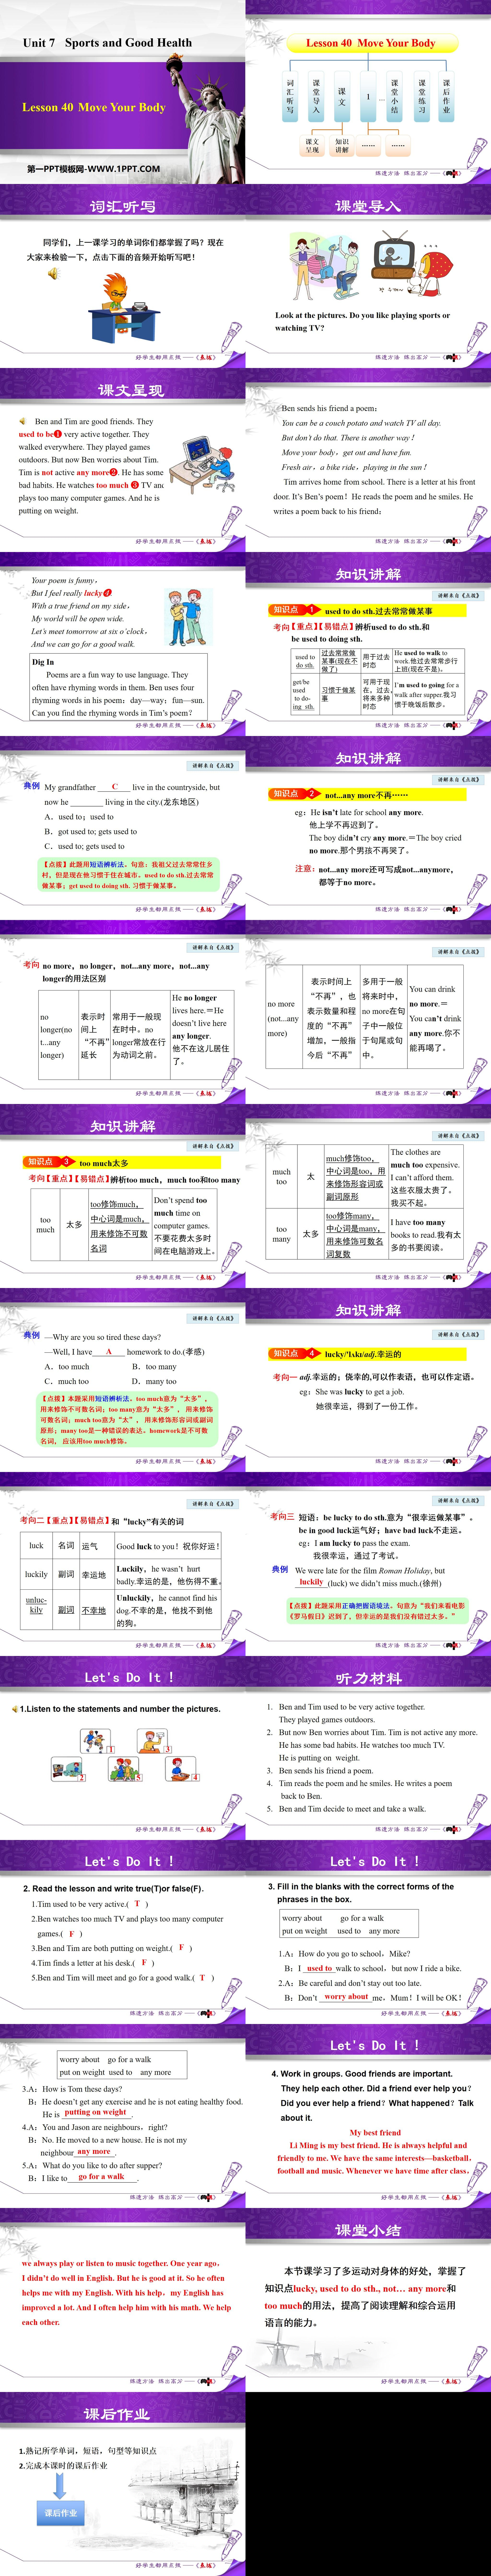 《Move Your Body》Sports and Good Health PPT免费课件
（2）